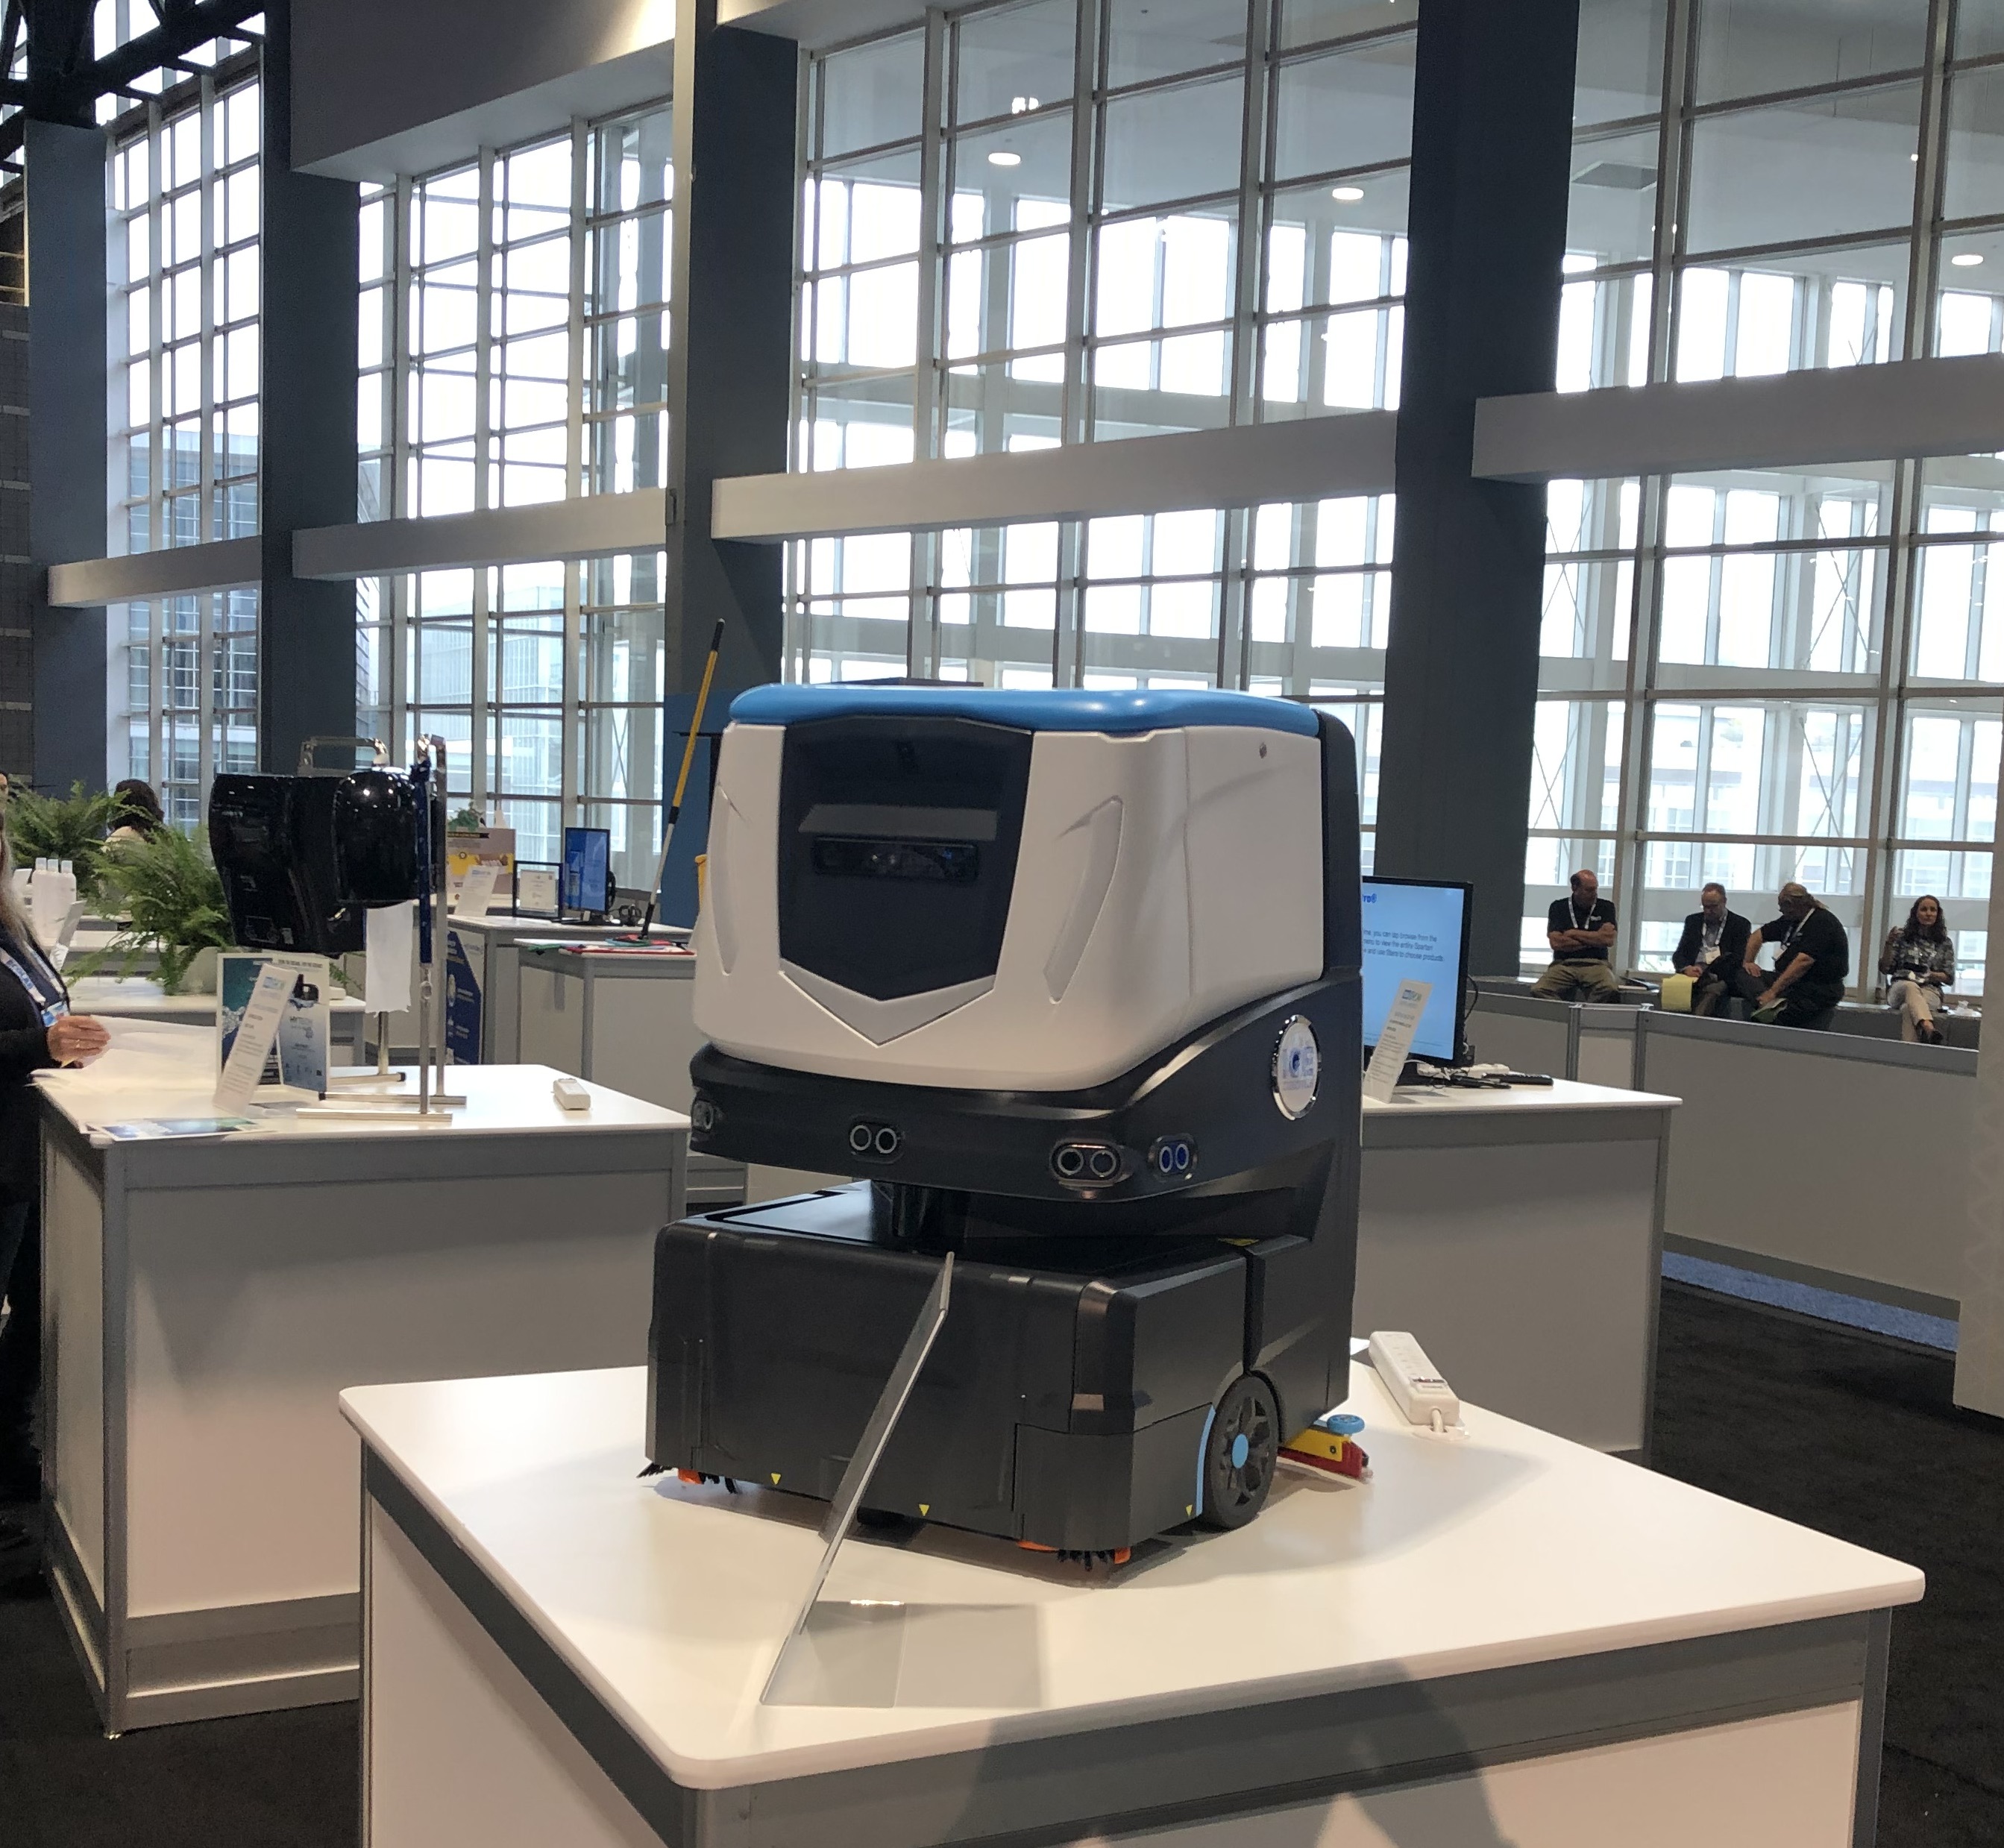 Cobi 18 on display in the Innovation Station at ISSA 2022